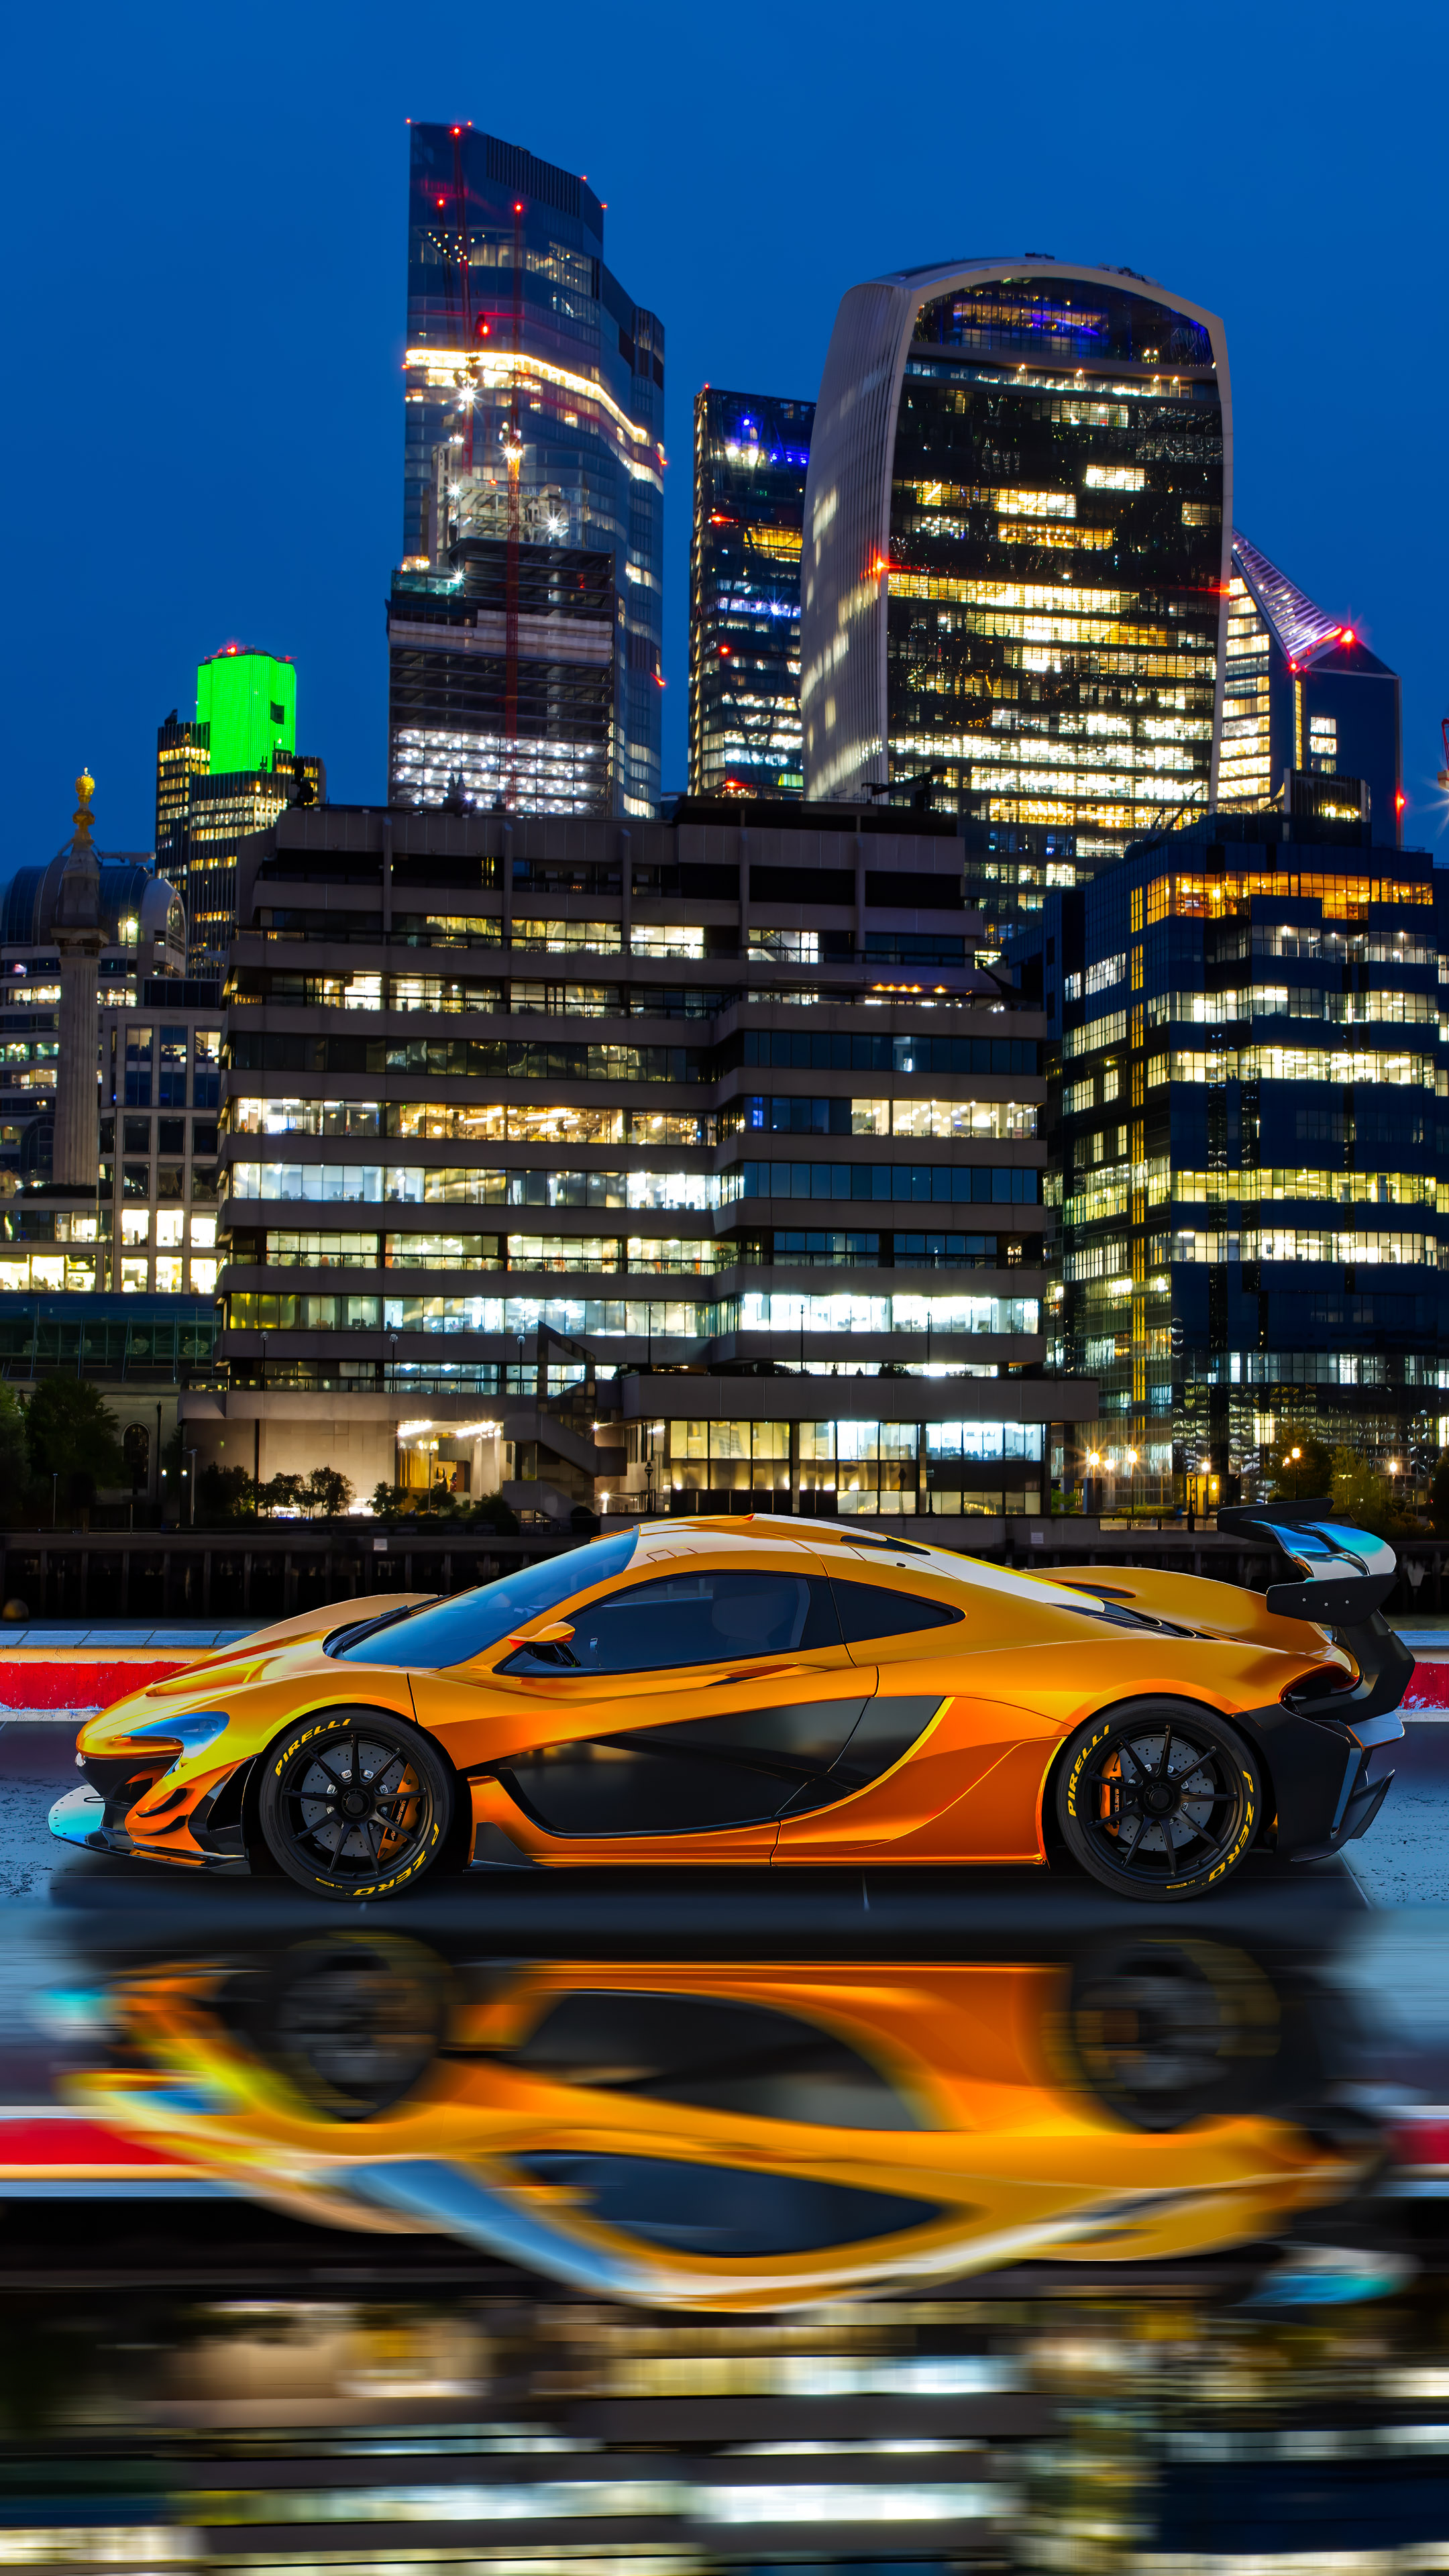 Immerse yourself in the world of high-performance with the cool sports car wallpaper, highlighting the McLaren P1 GTR in all its dynamic glory.